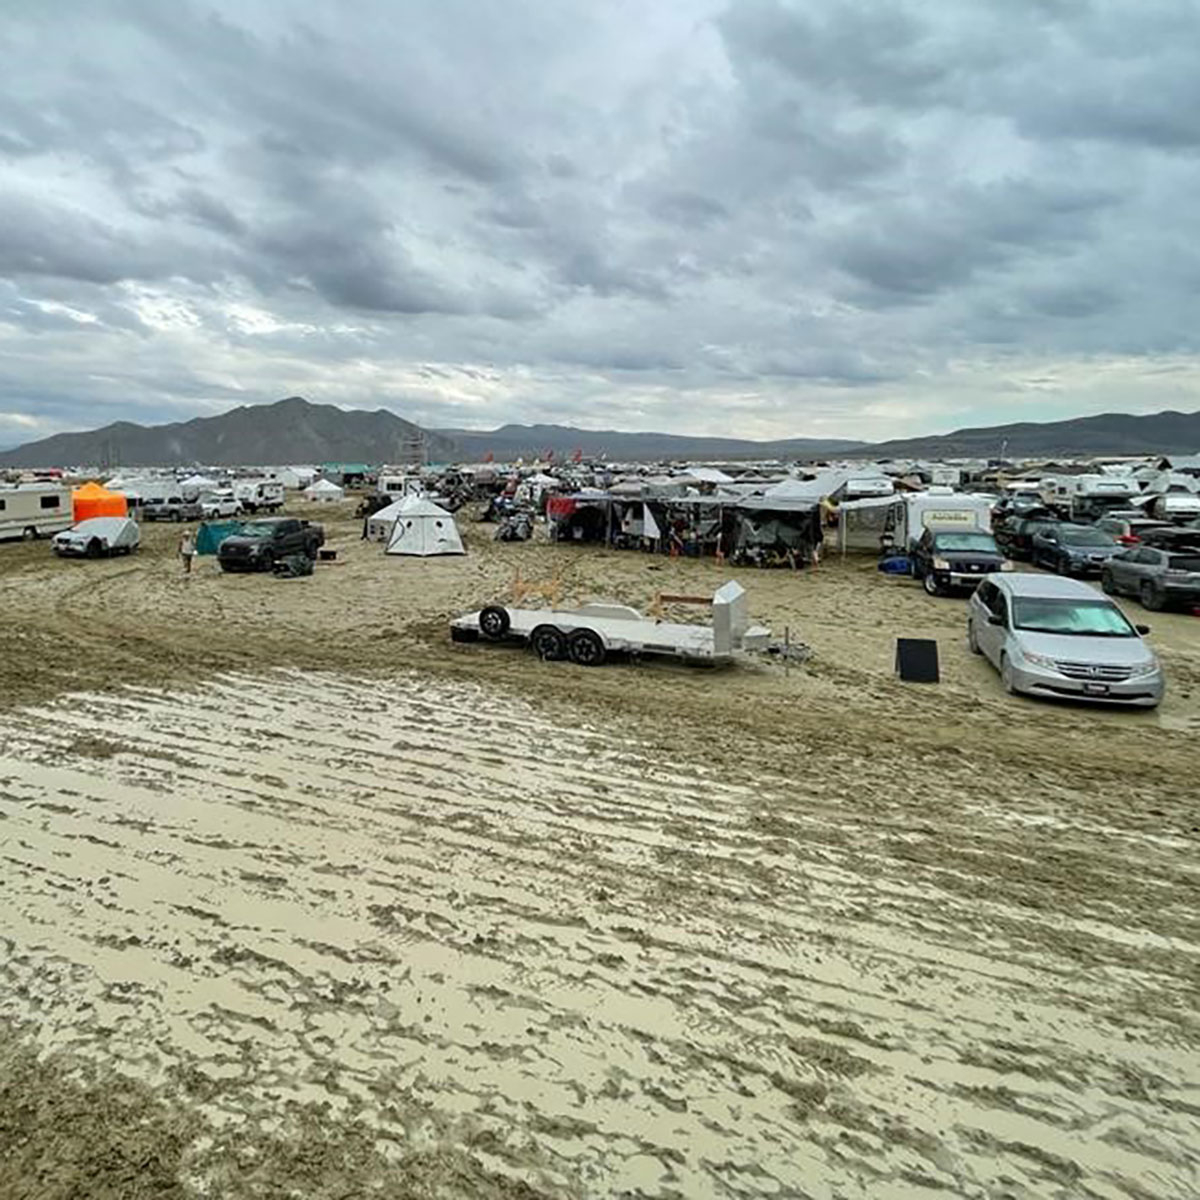 Burning Man: One Person Dead, Thousands Remain Stranded After Rain